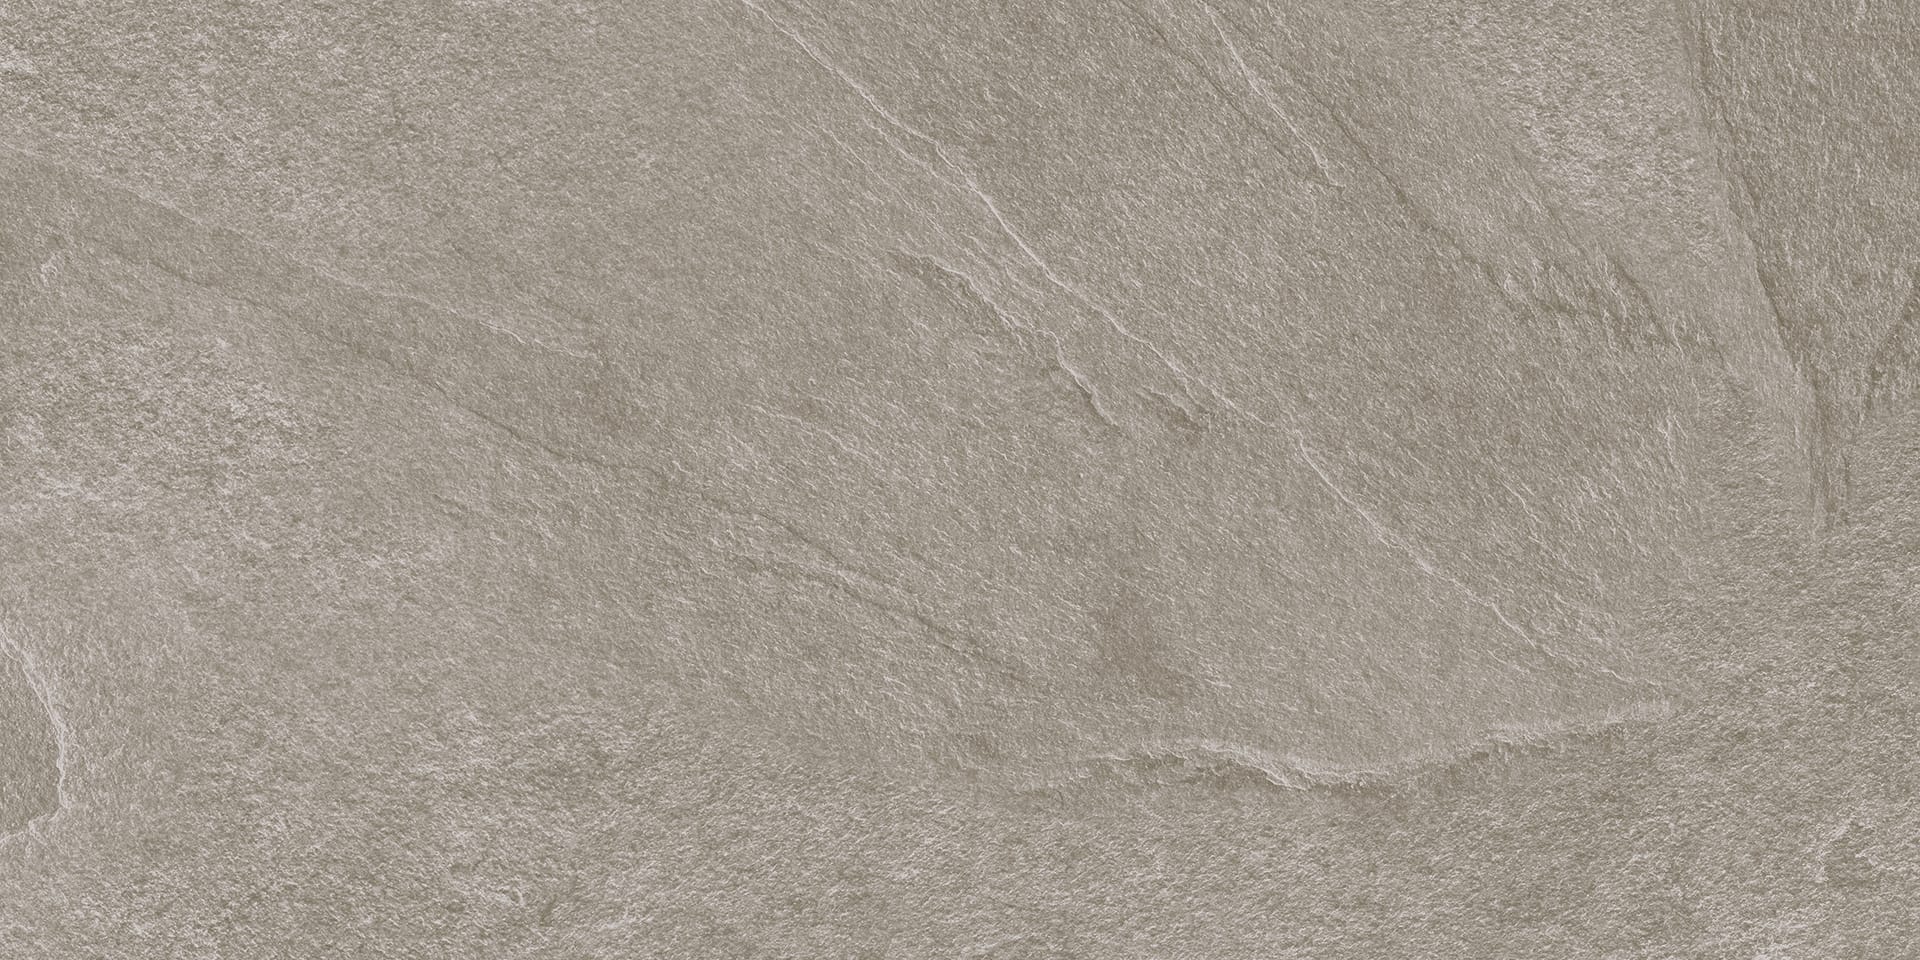 Verbier Earth Stone Effect Porcelain Wall and Floor Tile 30x60cm